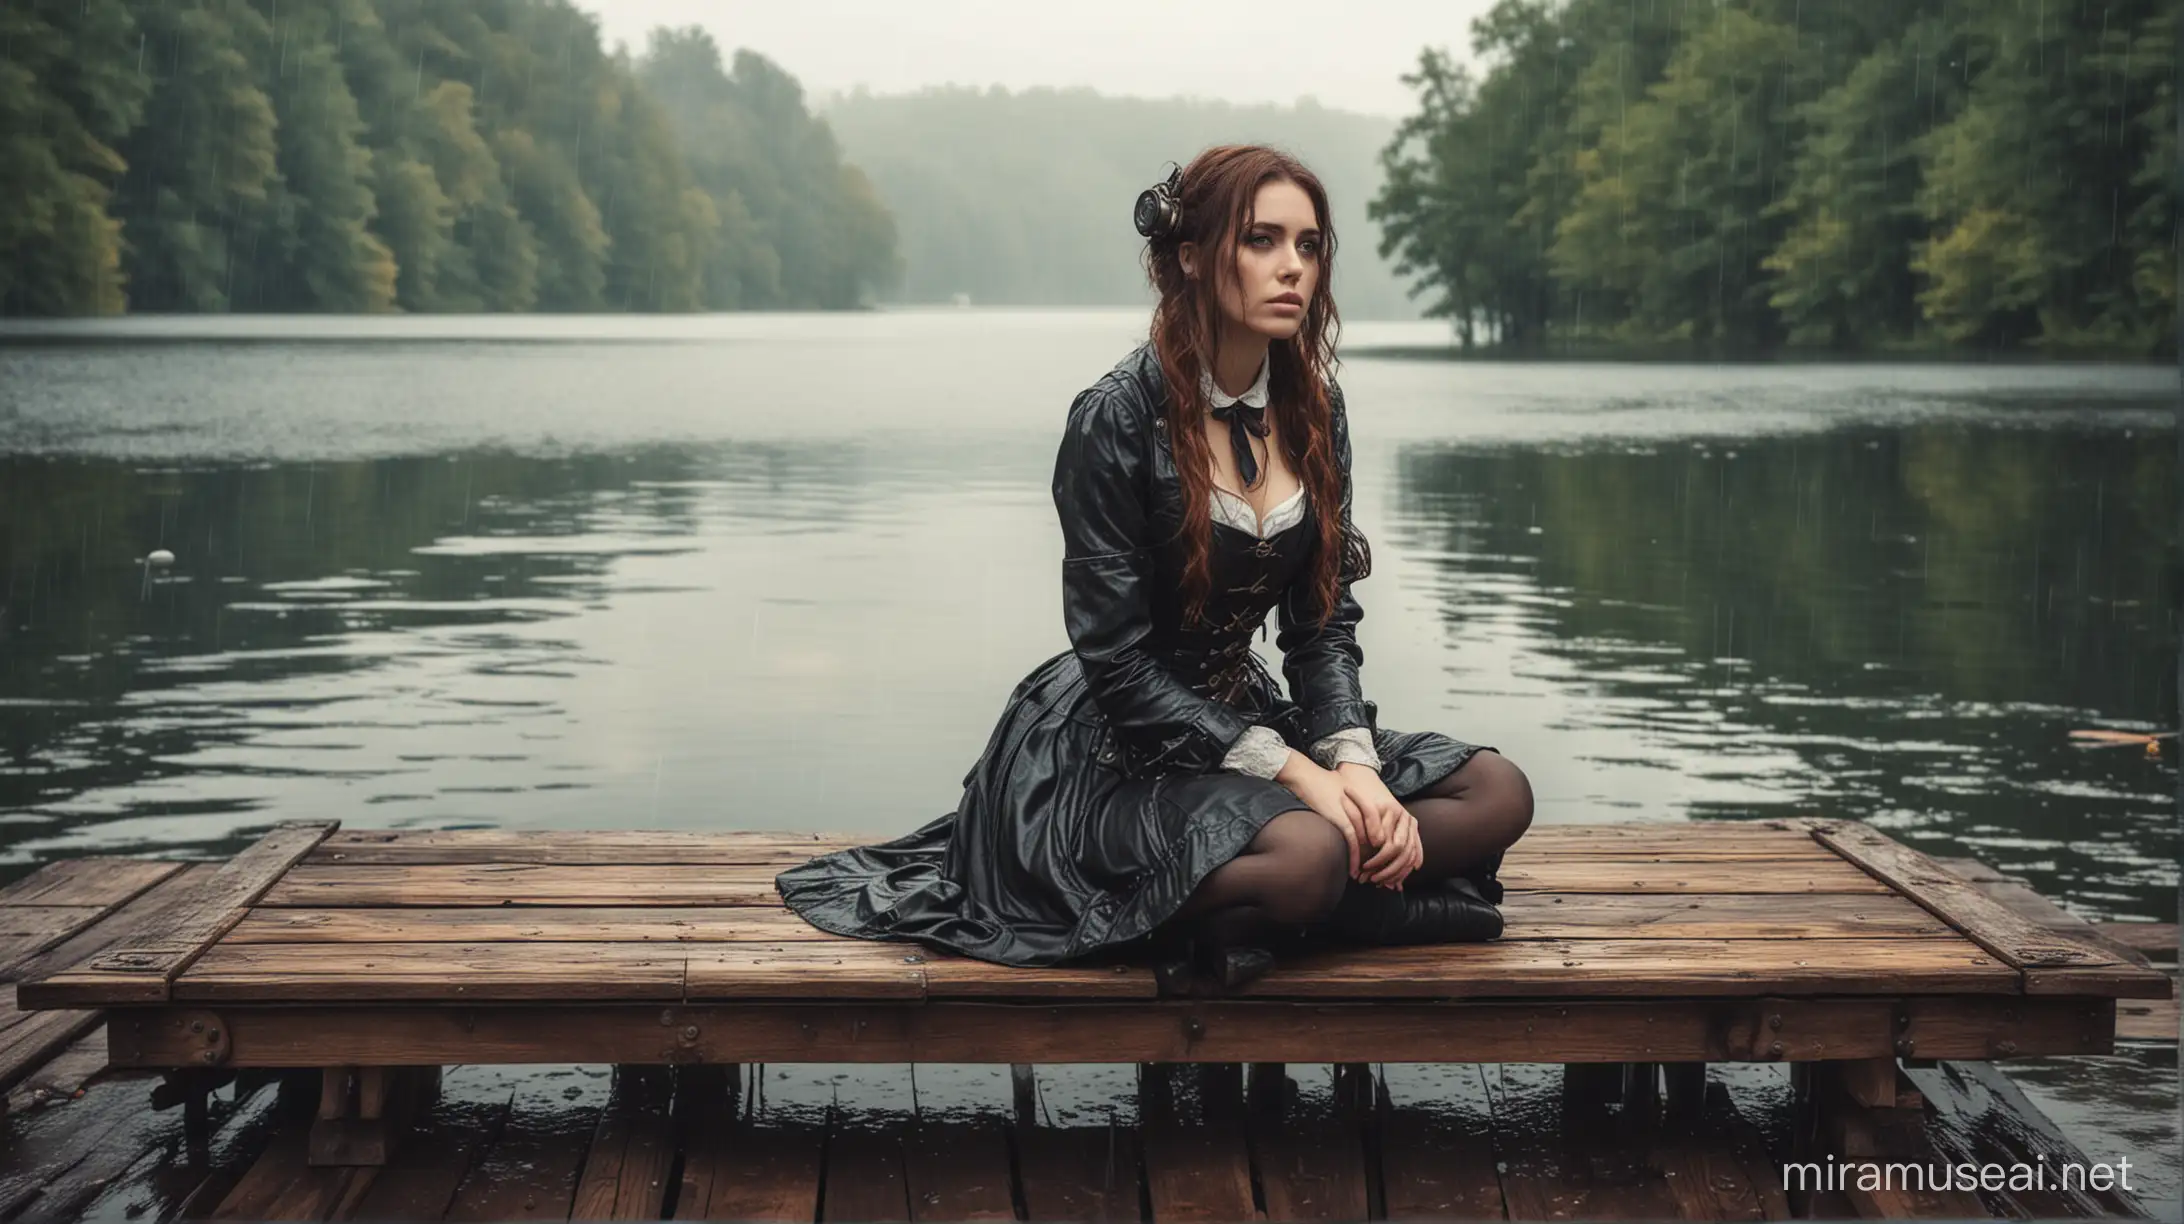 young steampunk woman sits at the end of a wooden platform on the lake. the woman is very sad. rainy